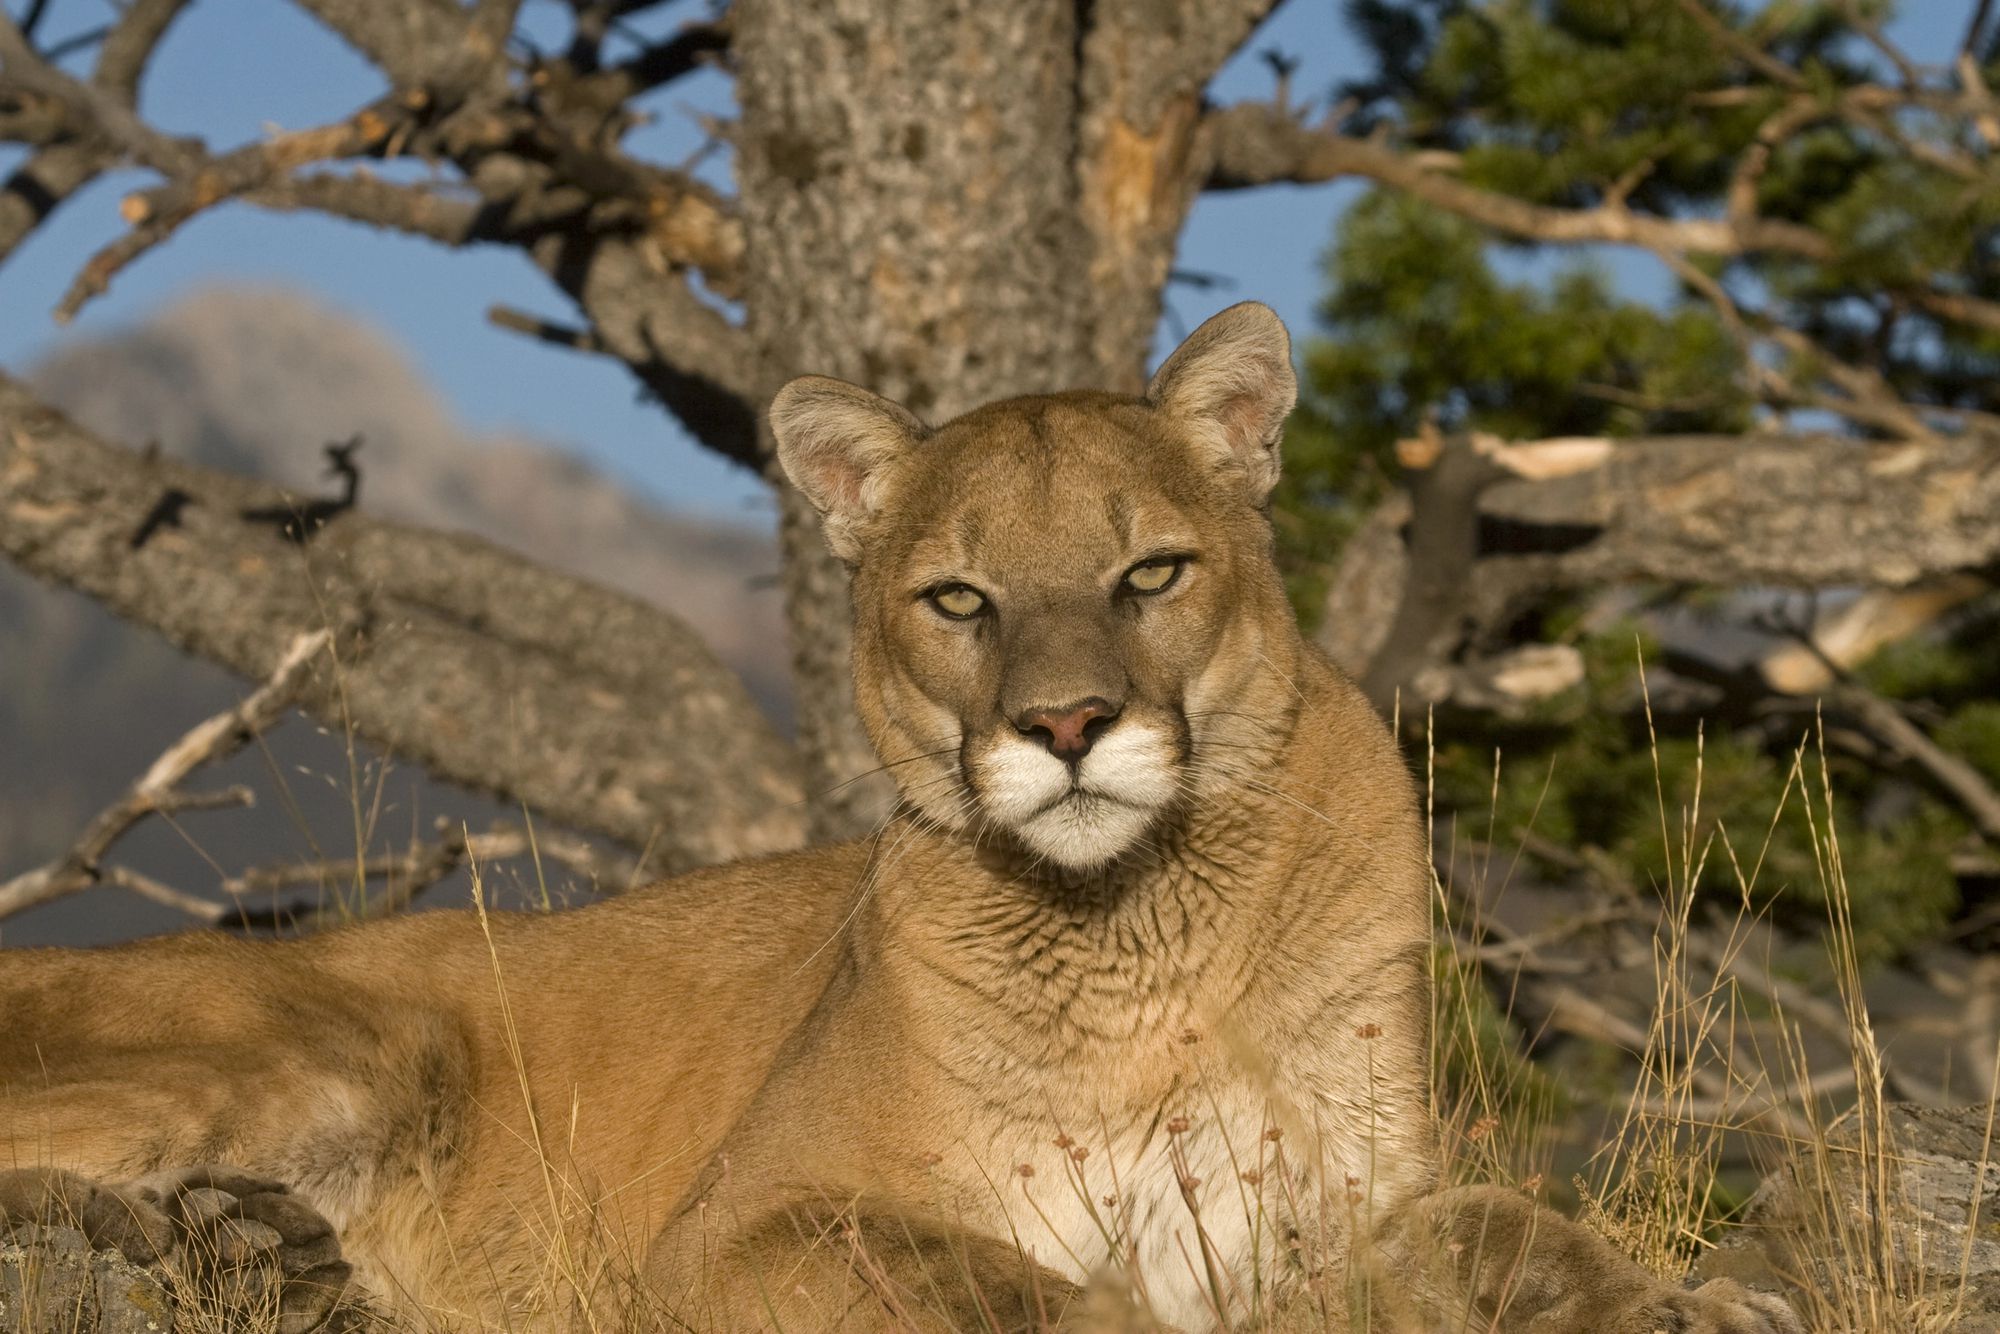 <p><b>Fatal attacks since the 1970s:</b>  16</p><p>Also known as mountain lions, cougars inhabit various environments across the Americas. While cougars have historically roamed throughout North and South America, their numbers in the eastern U.S. have drastically declined due to extensive hunting and loss of habitat. Although cougar attacks on humans are uncommon, they can happen, particularly with young cougars that are testing their boundaries. In the event of an encounter, do not run — instead, stand tall, make noise, and try to appear intimidating while throwing objects if necessary.</p>